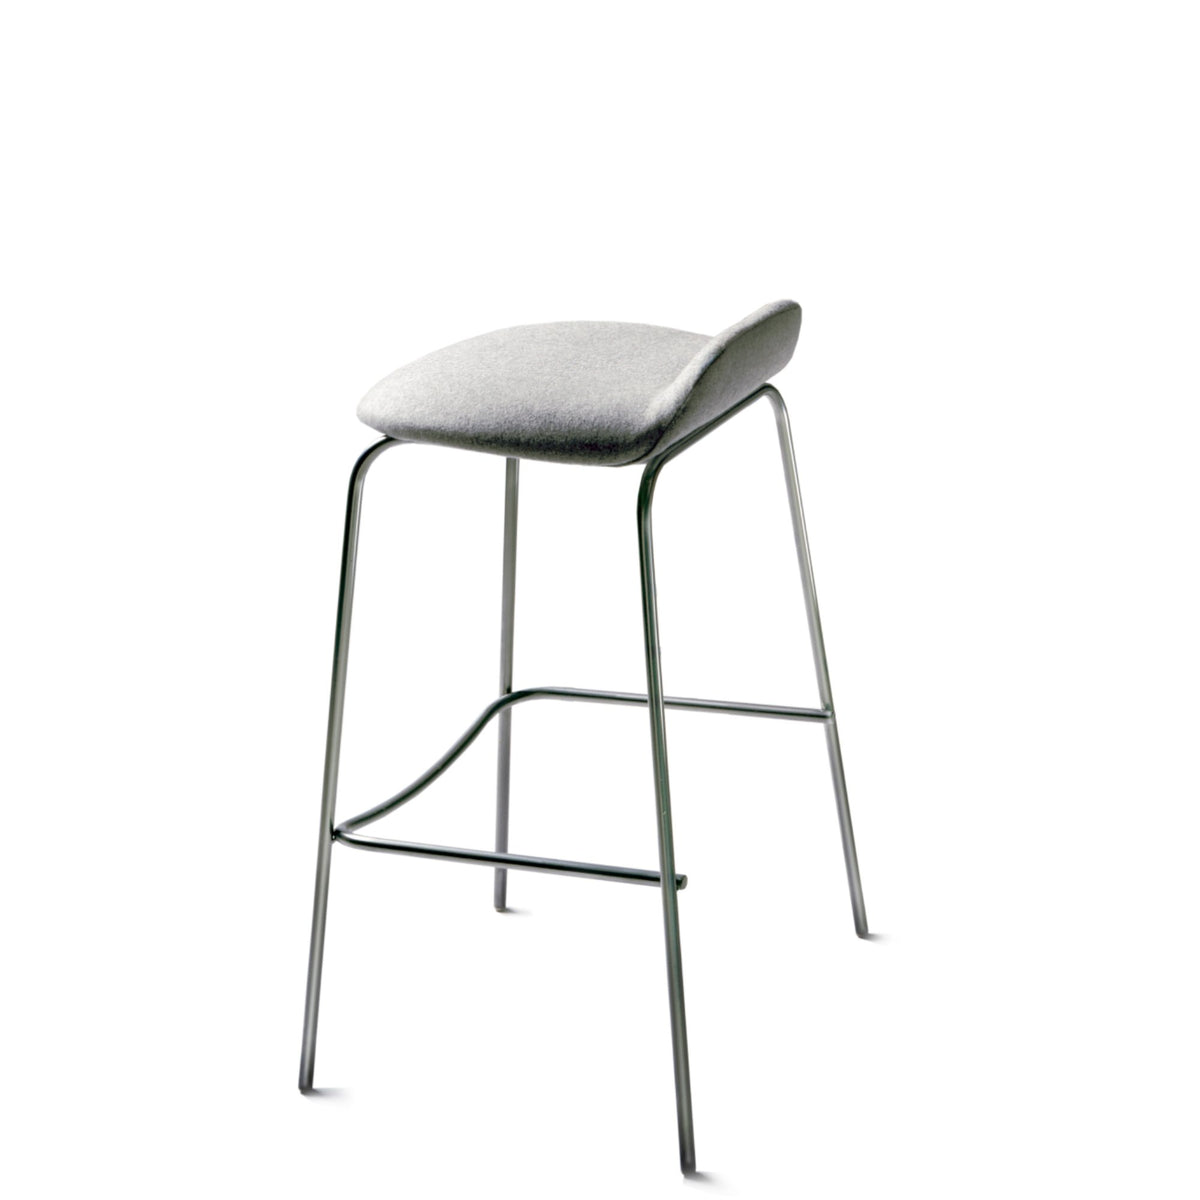 New Design Group Coffee Stool Fully Upholstered Low Back Surrey CUZ1E